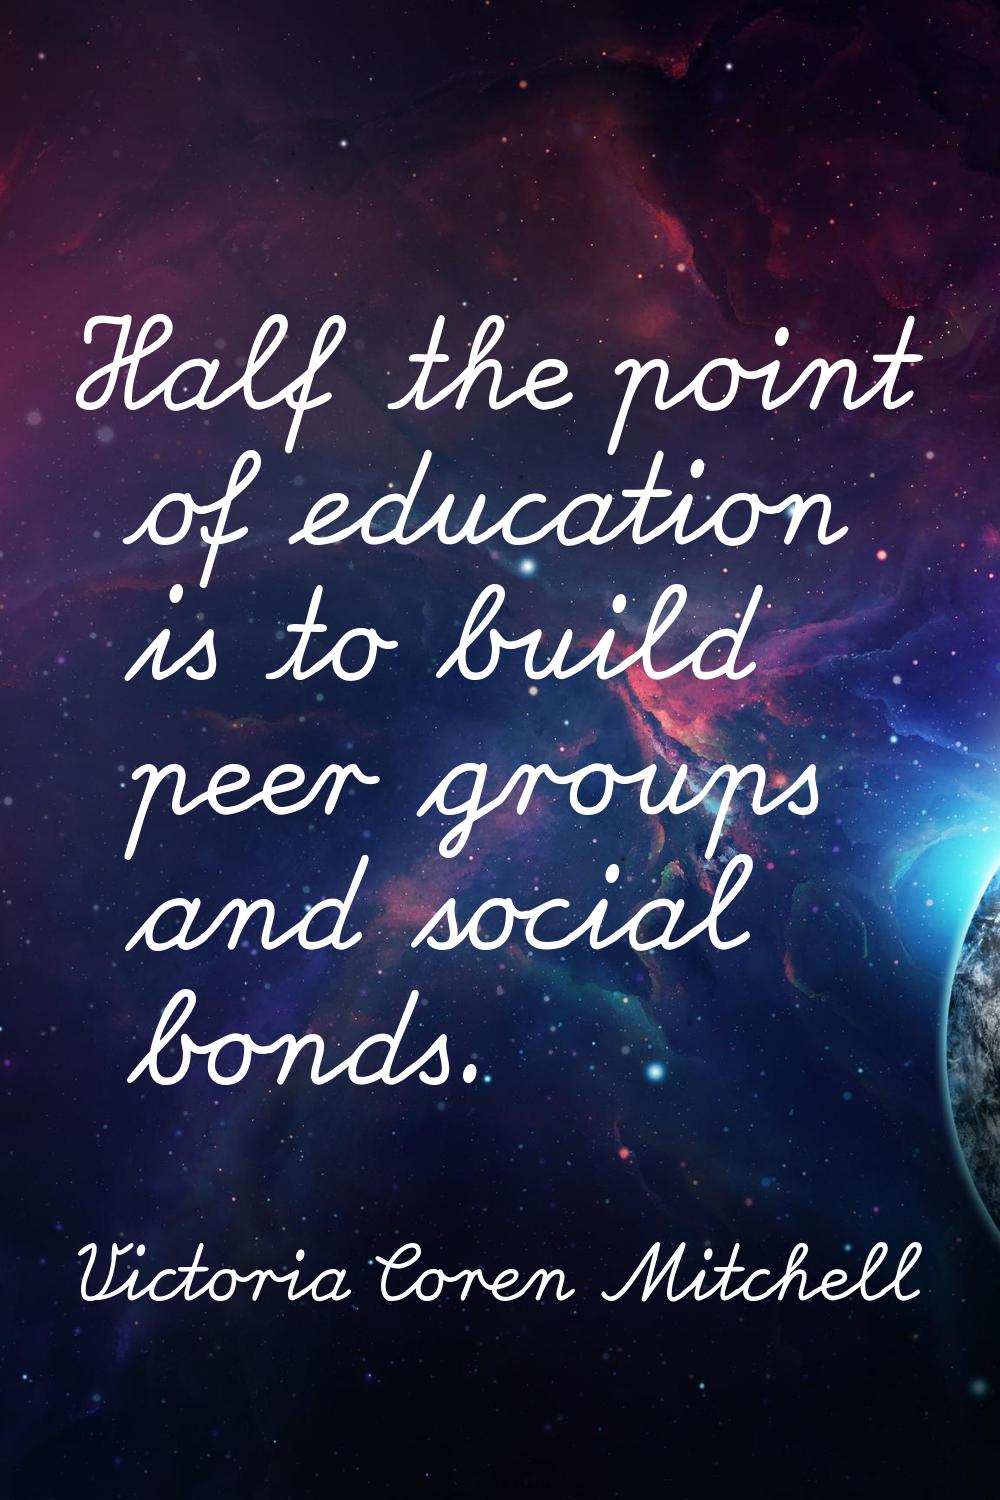 Half the point of education is to build peer groups and social bonds.